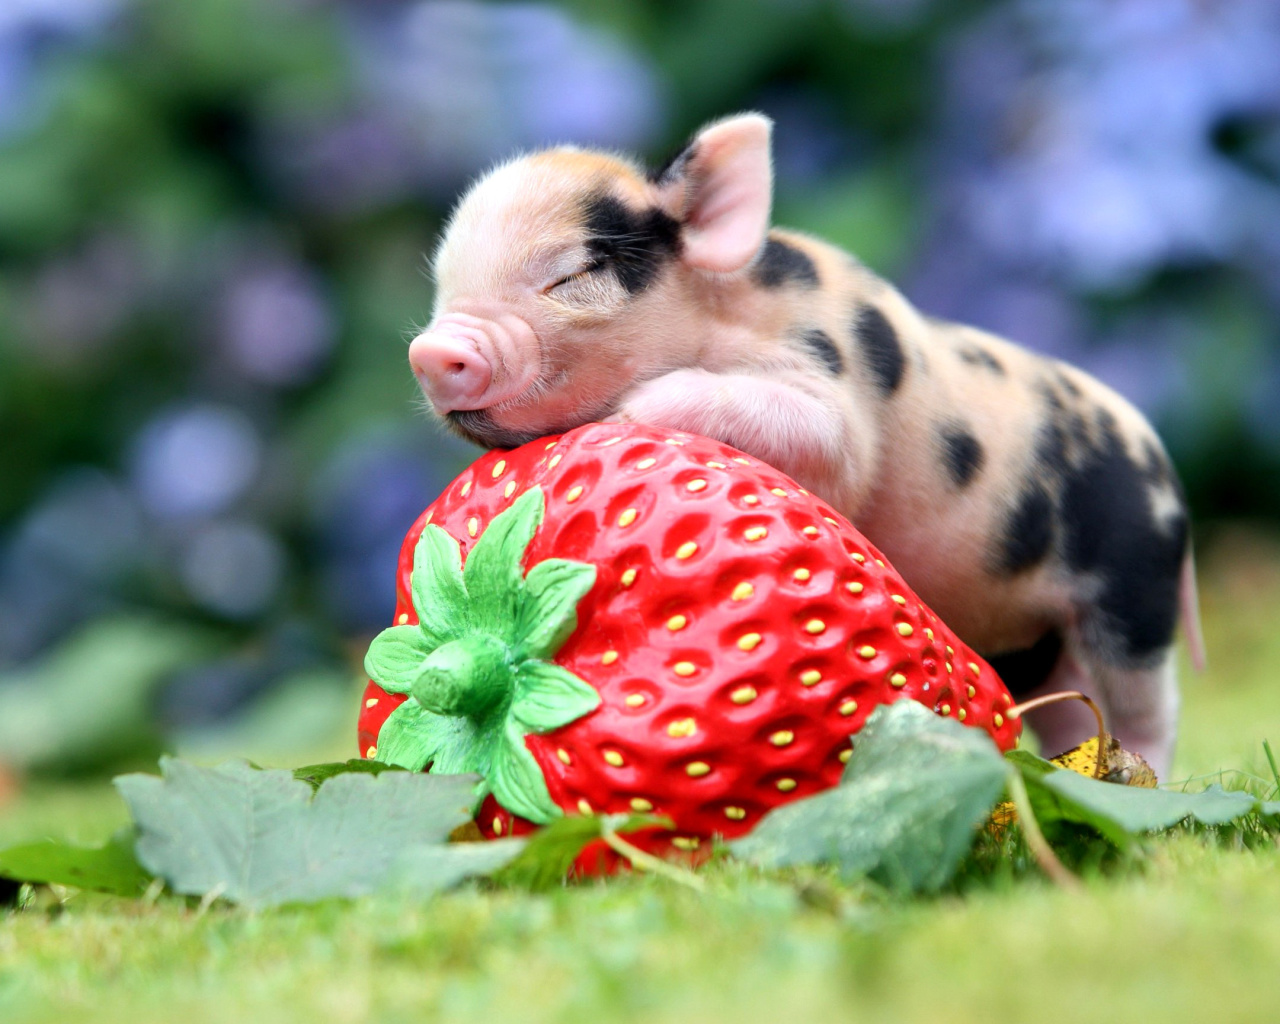 Pig and Strawberry wallpaper 1280x1024